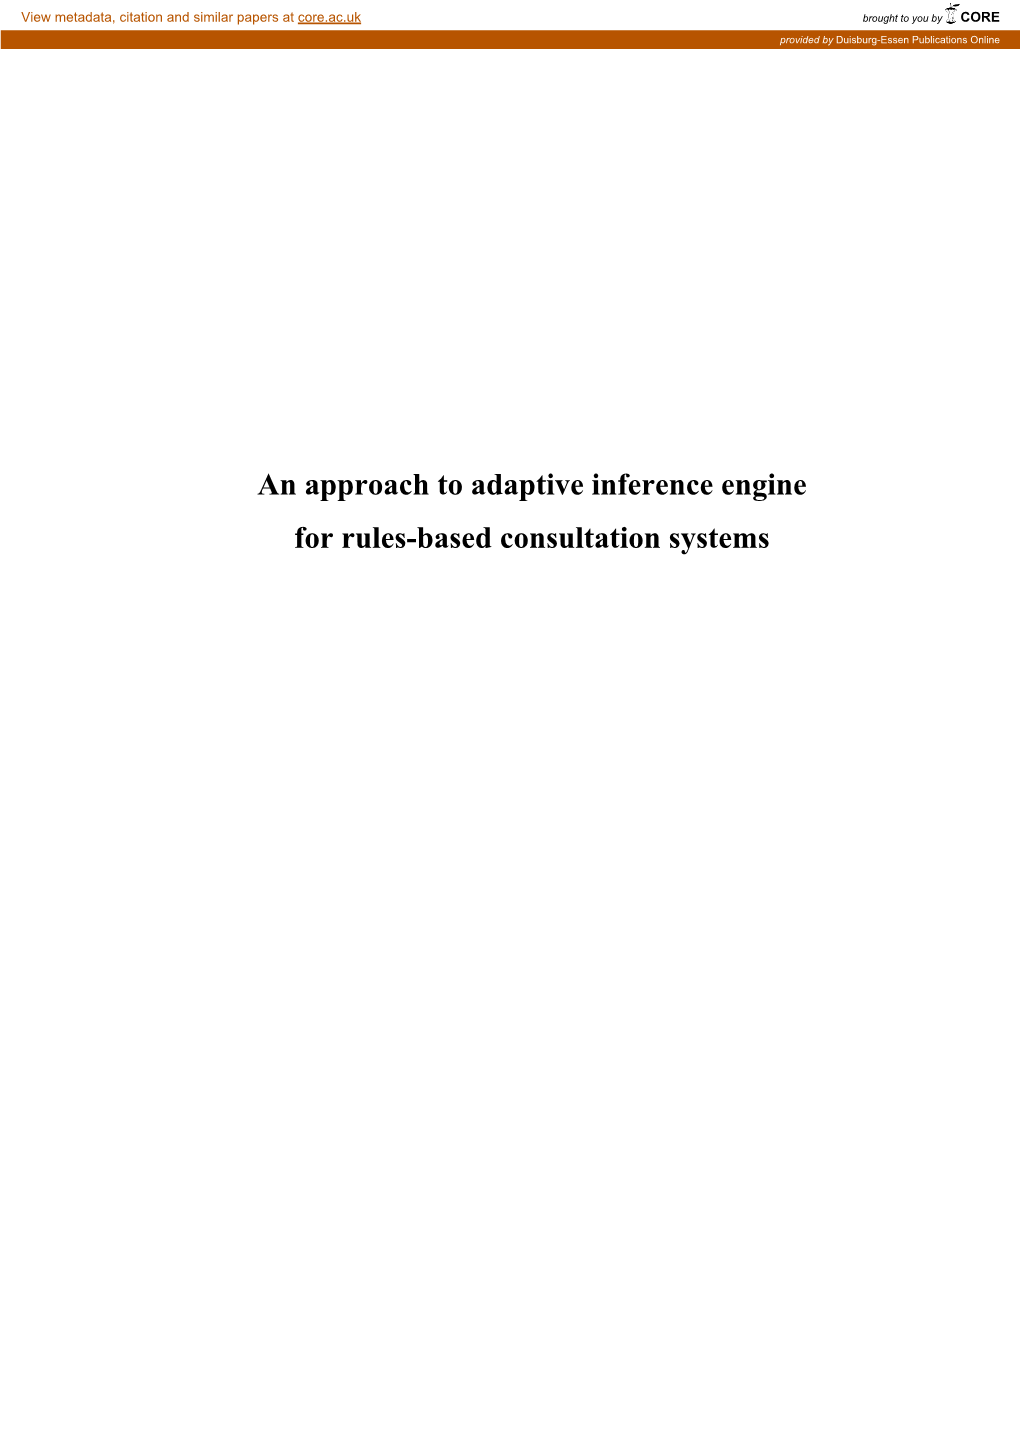 An Approach to Adaptive Inference Engine for Rules-Based Consultation Systems